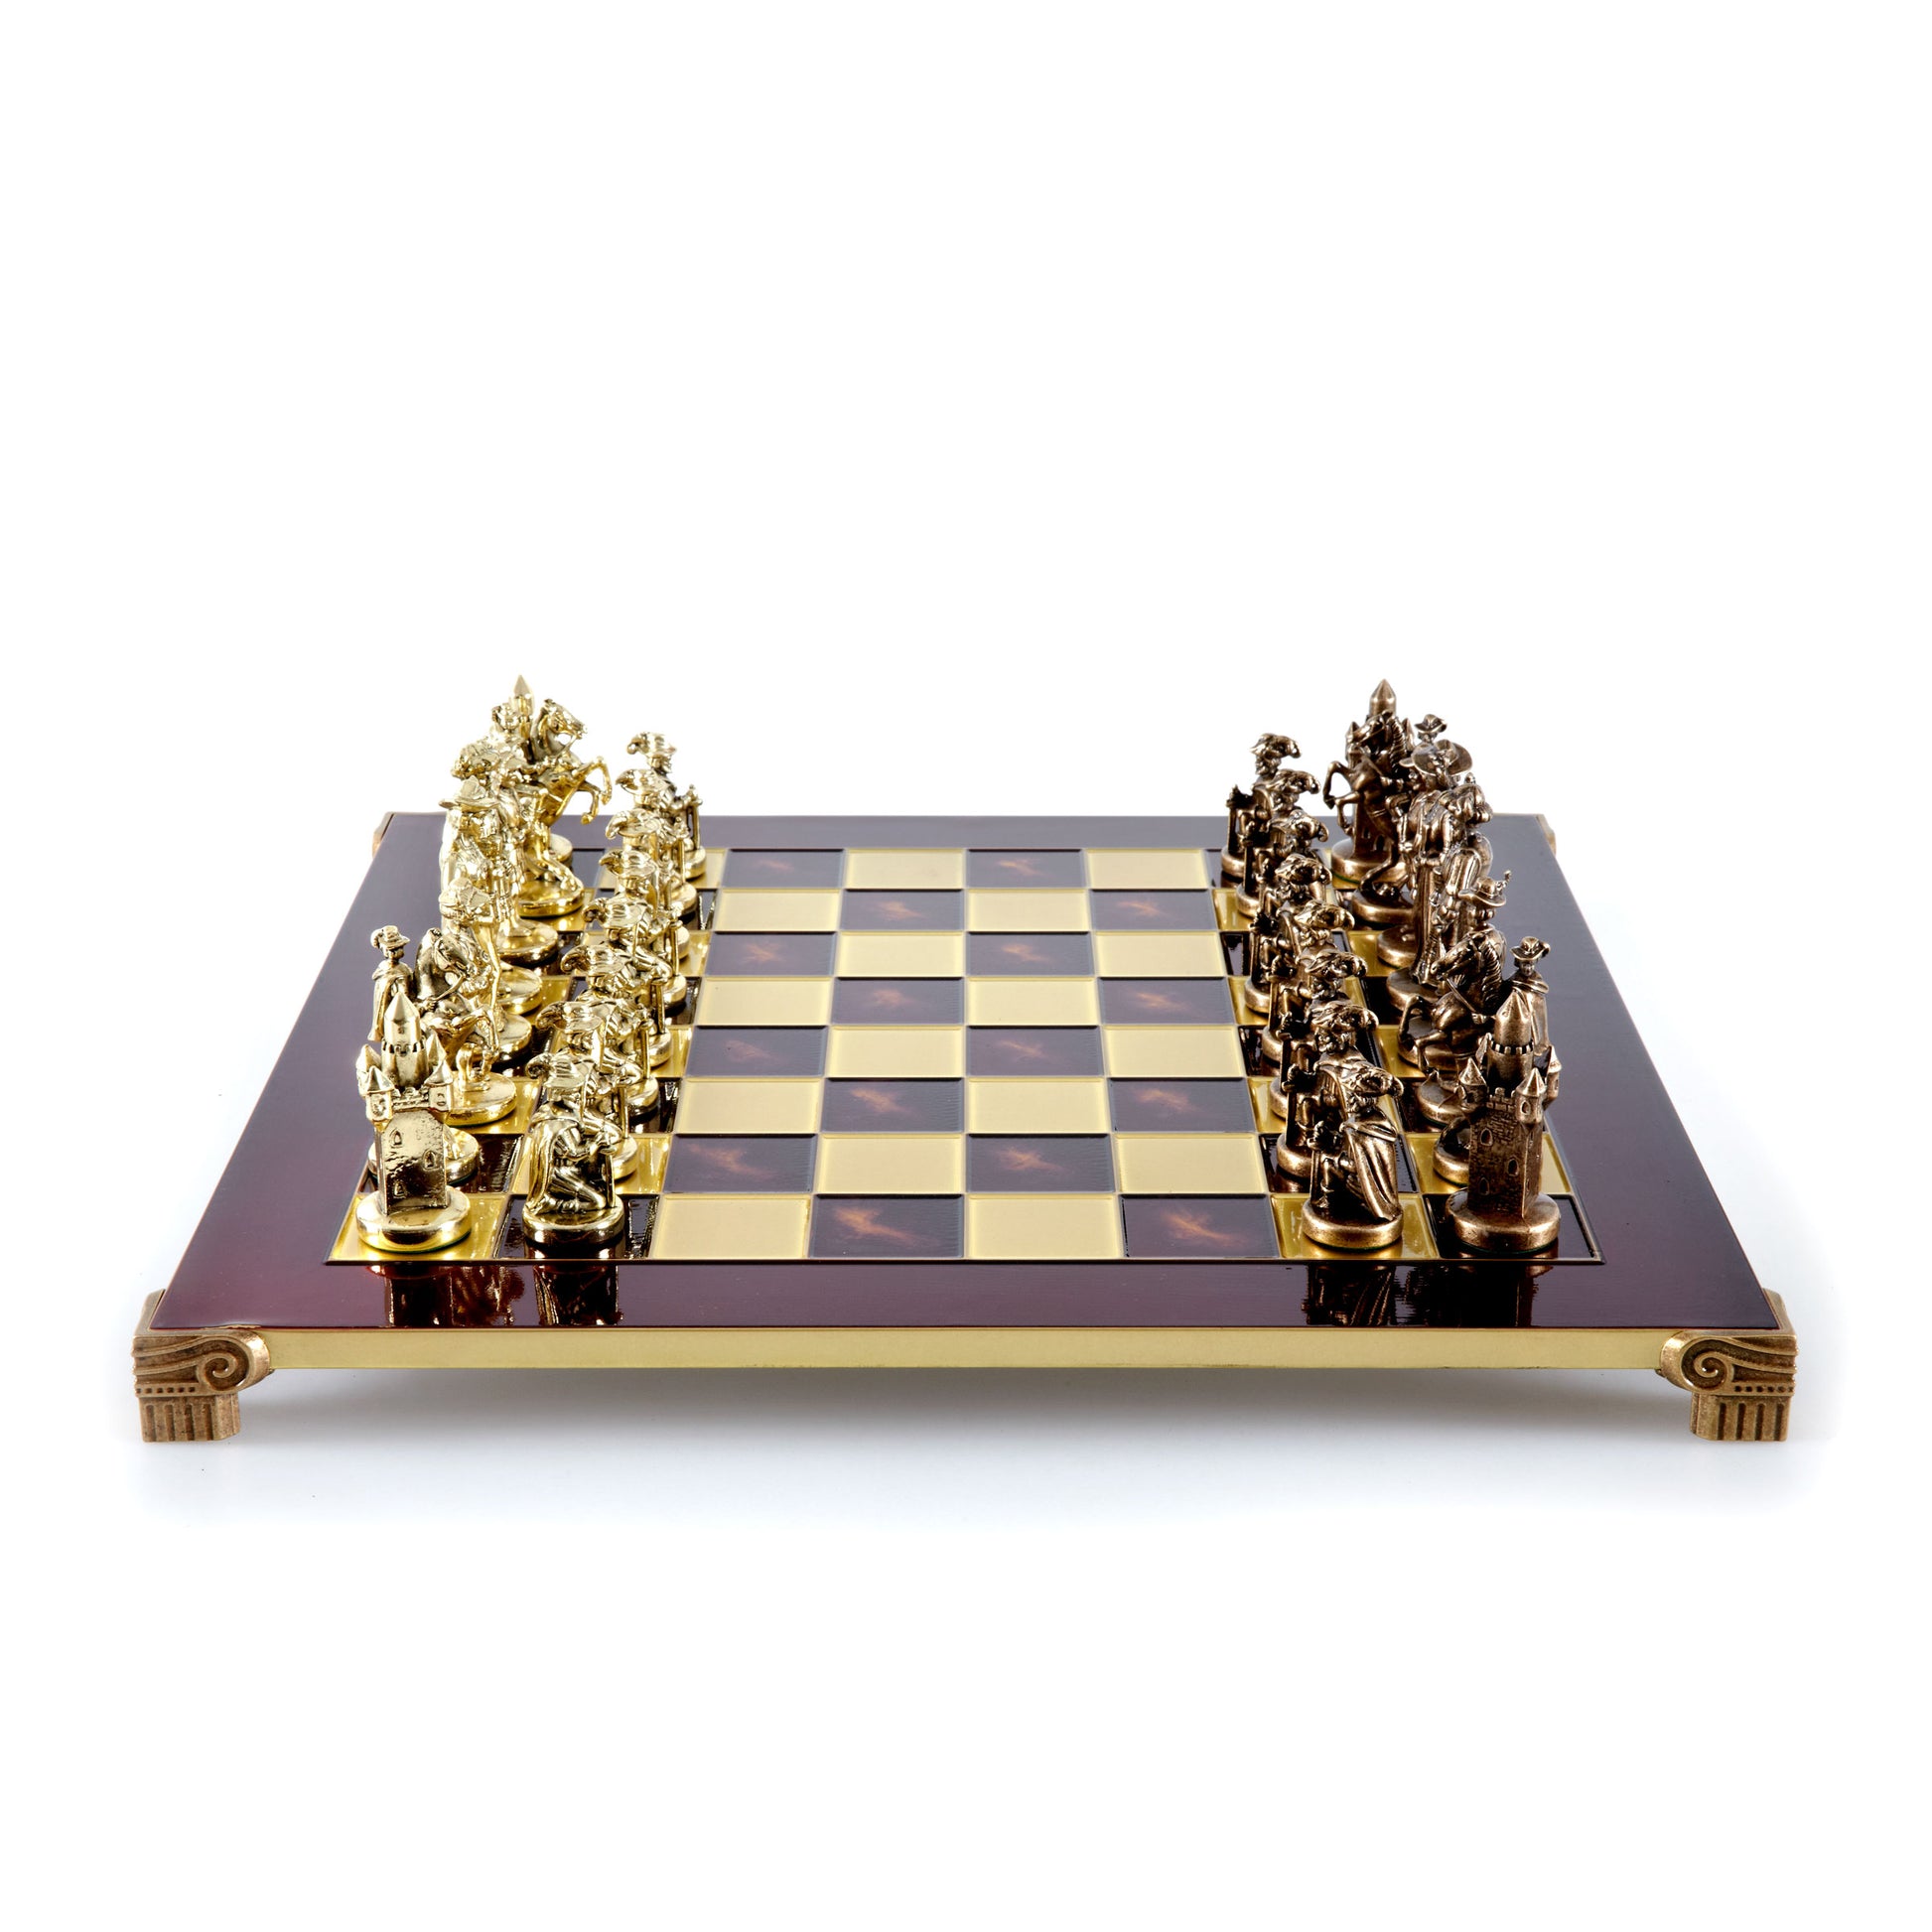 MEDIEVAL KNIGHTS CHESS SET with brown/gold chessmen and bronze chessboard 44 x 44cm  (Large) - Premium Chess from MANOPOULOS Chess & Backgammon - Just €275! Shop now at MANOPOULOS Chess & Backgammon